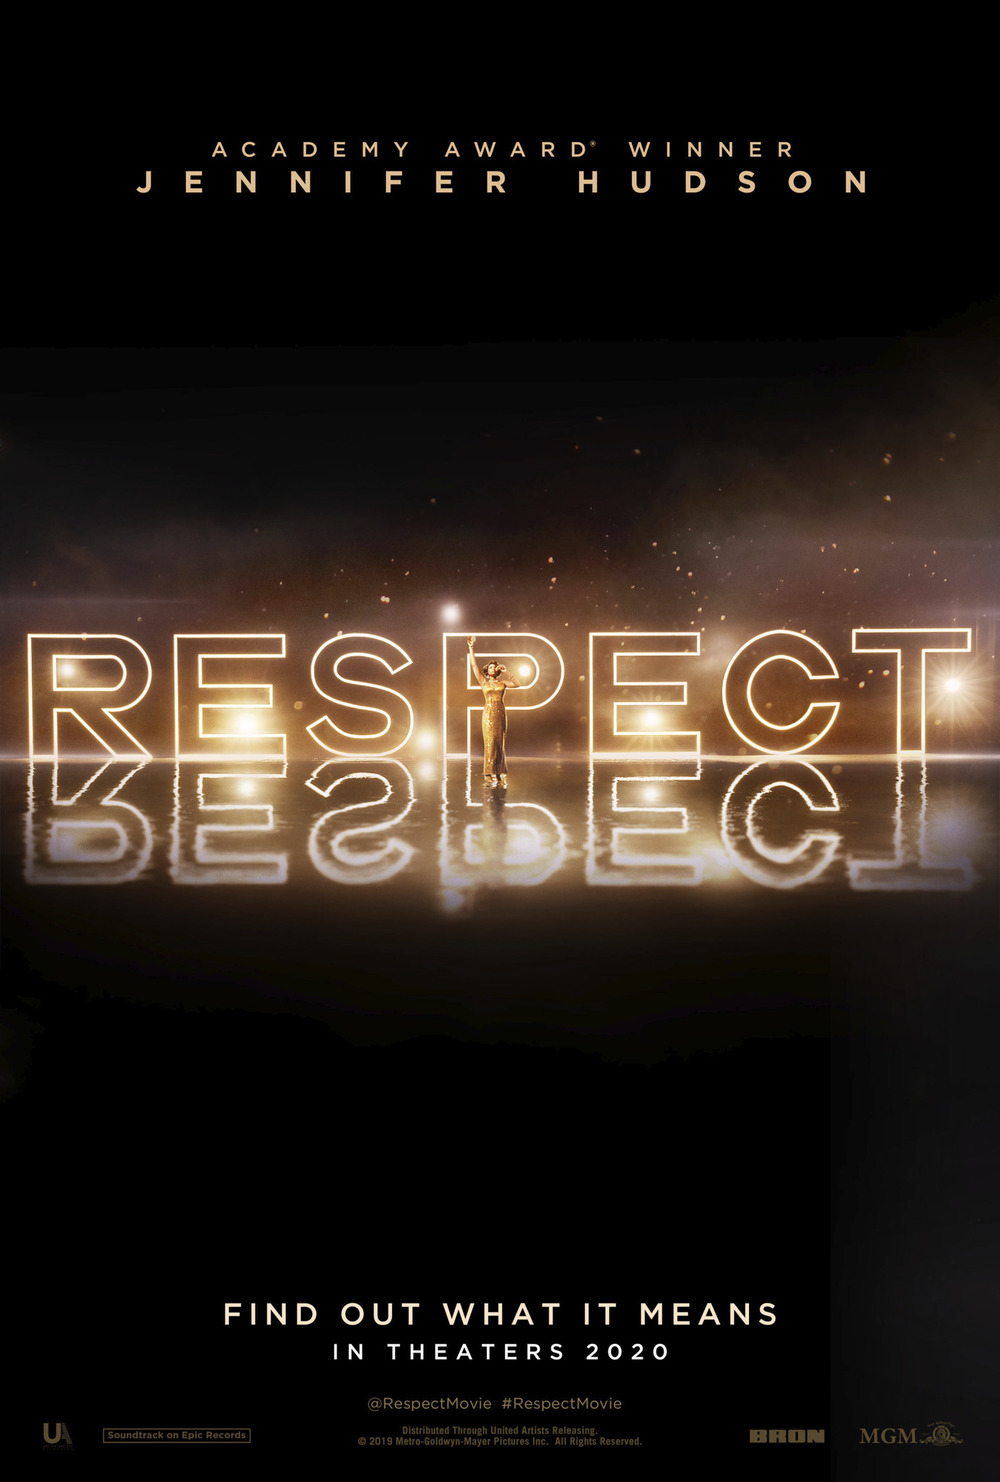 Respect in the workplace must be a paramount priority | Hi4CSR